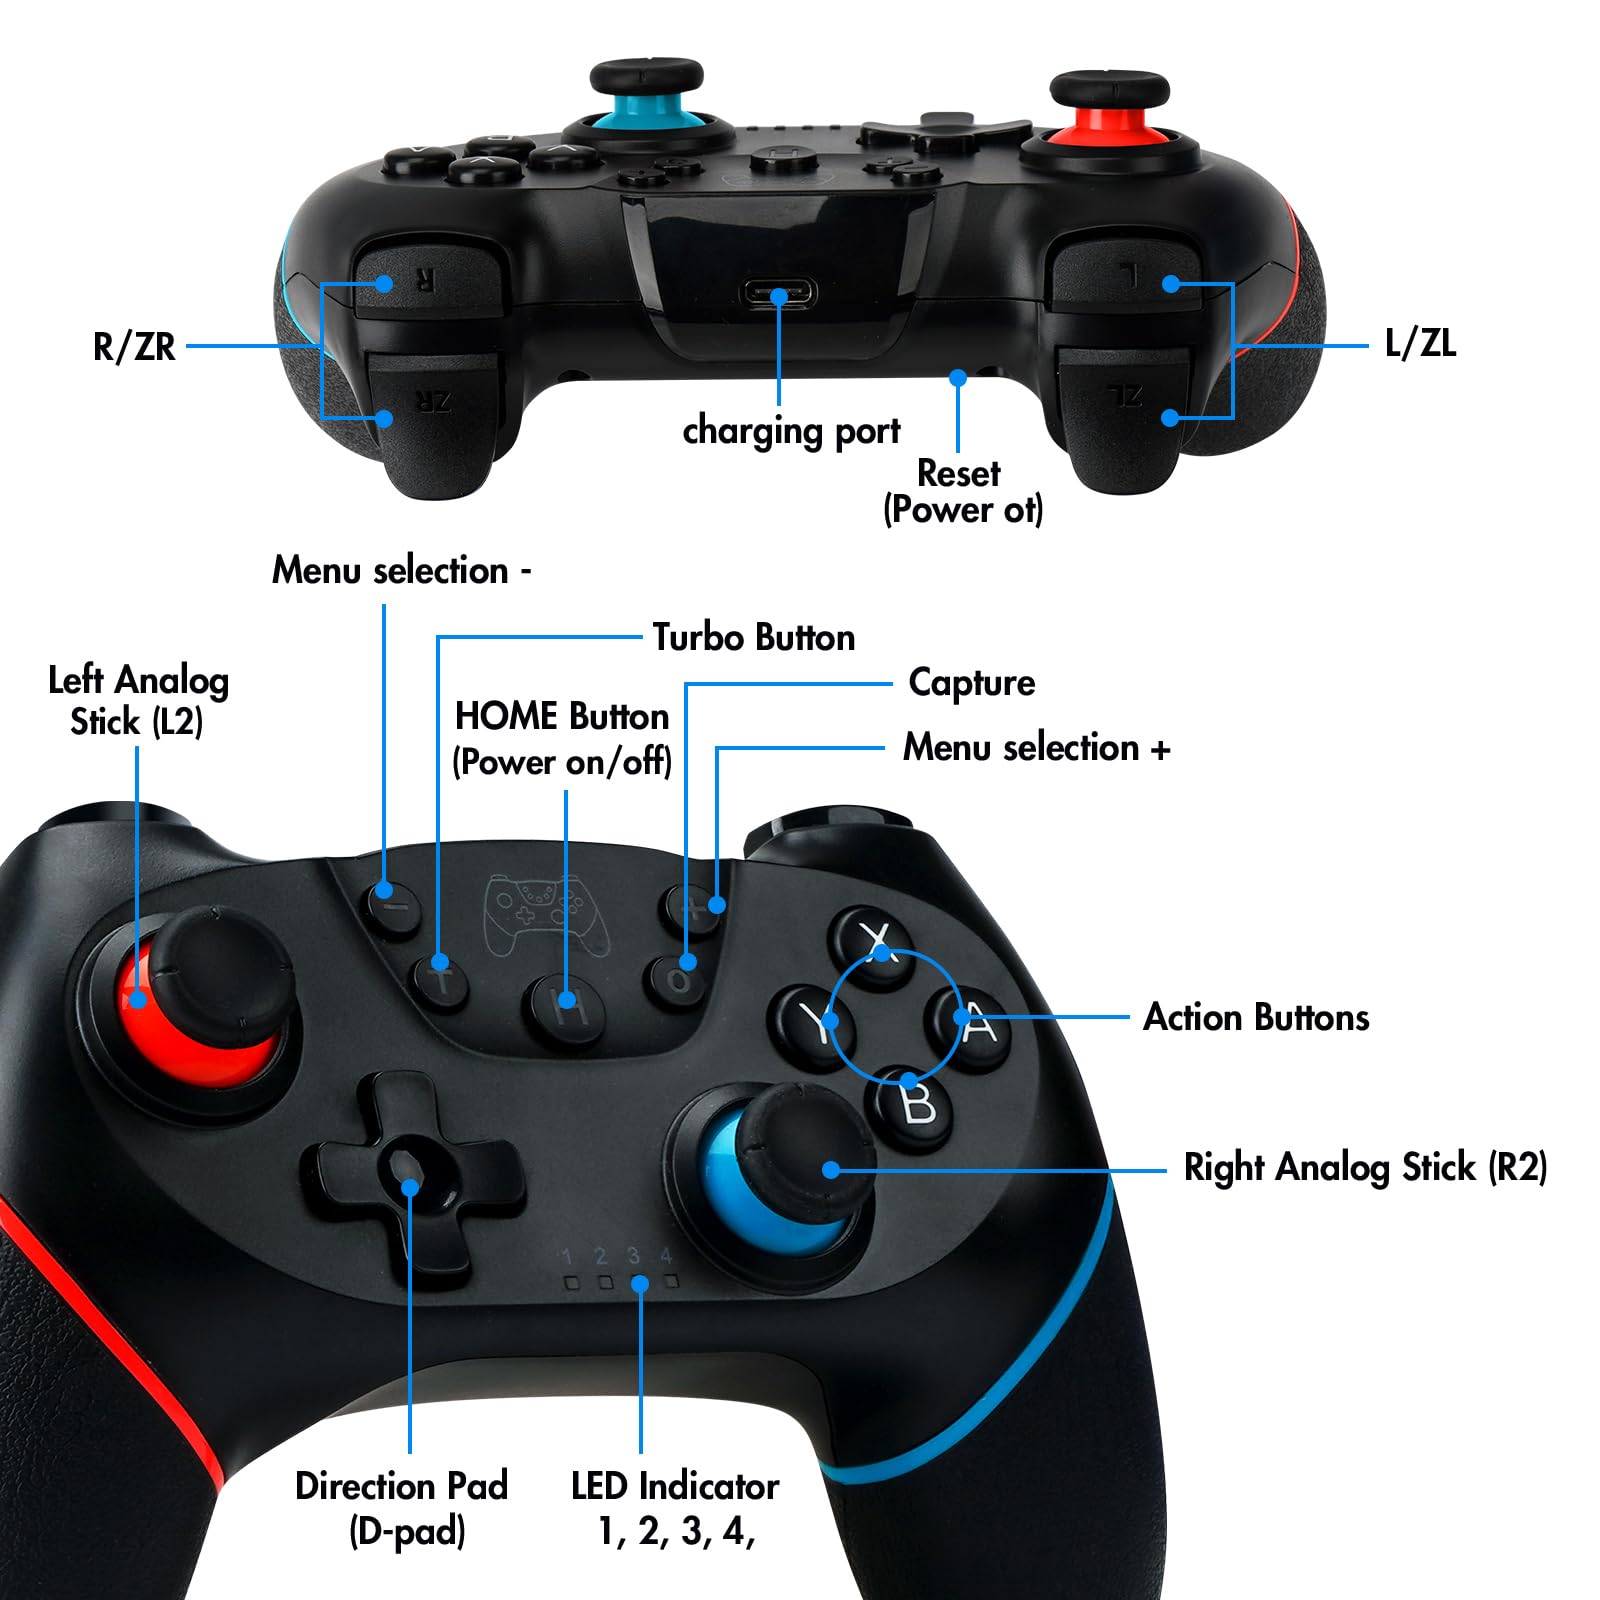 Game controller with a power button turned off